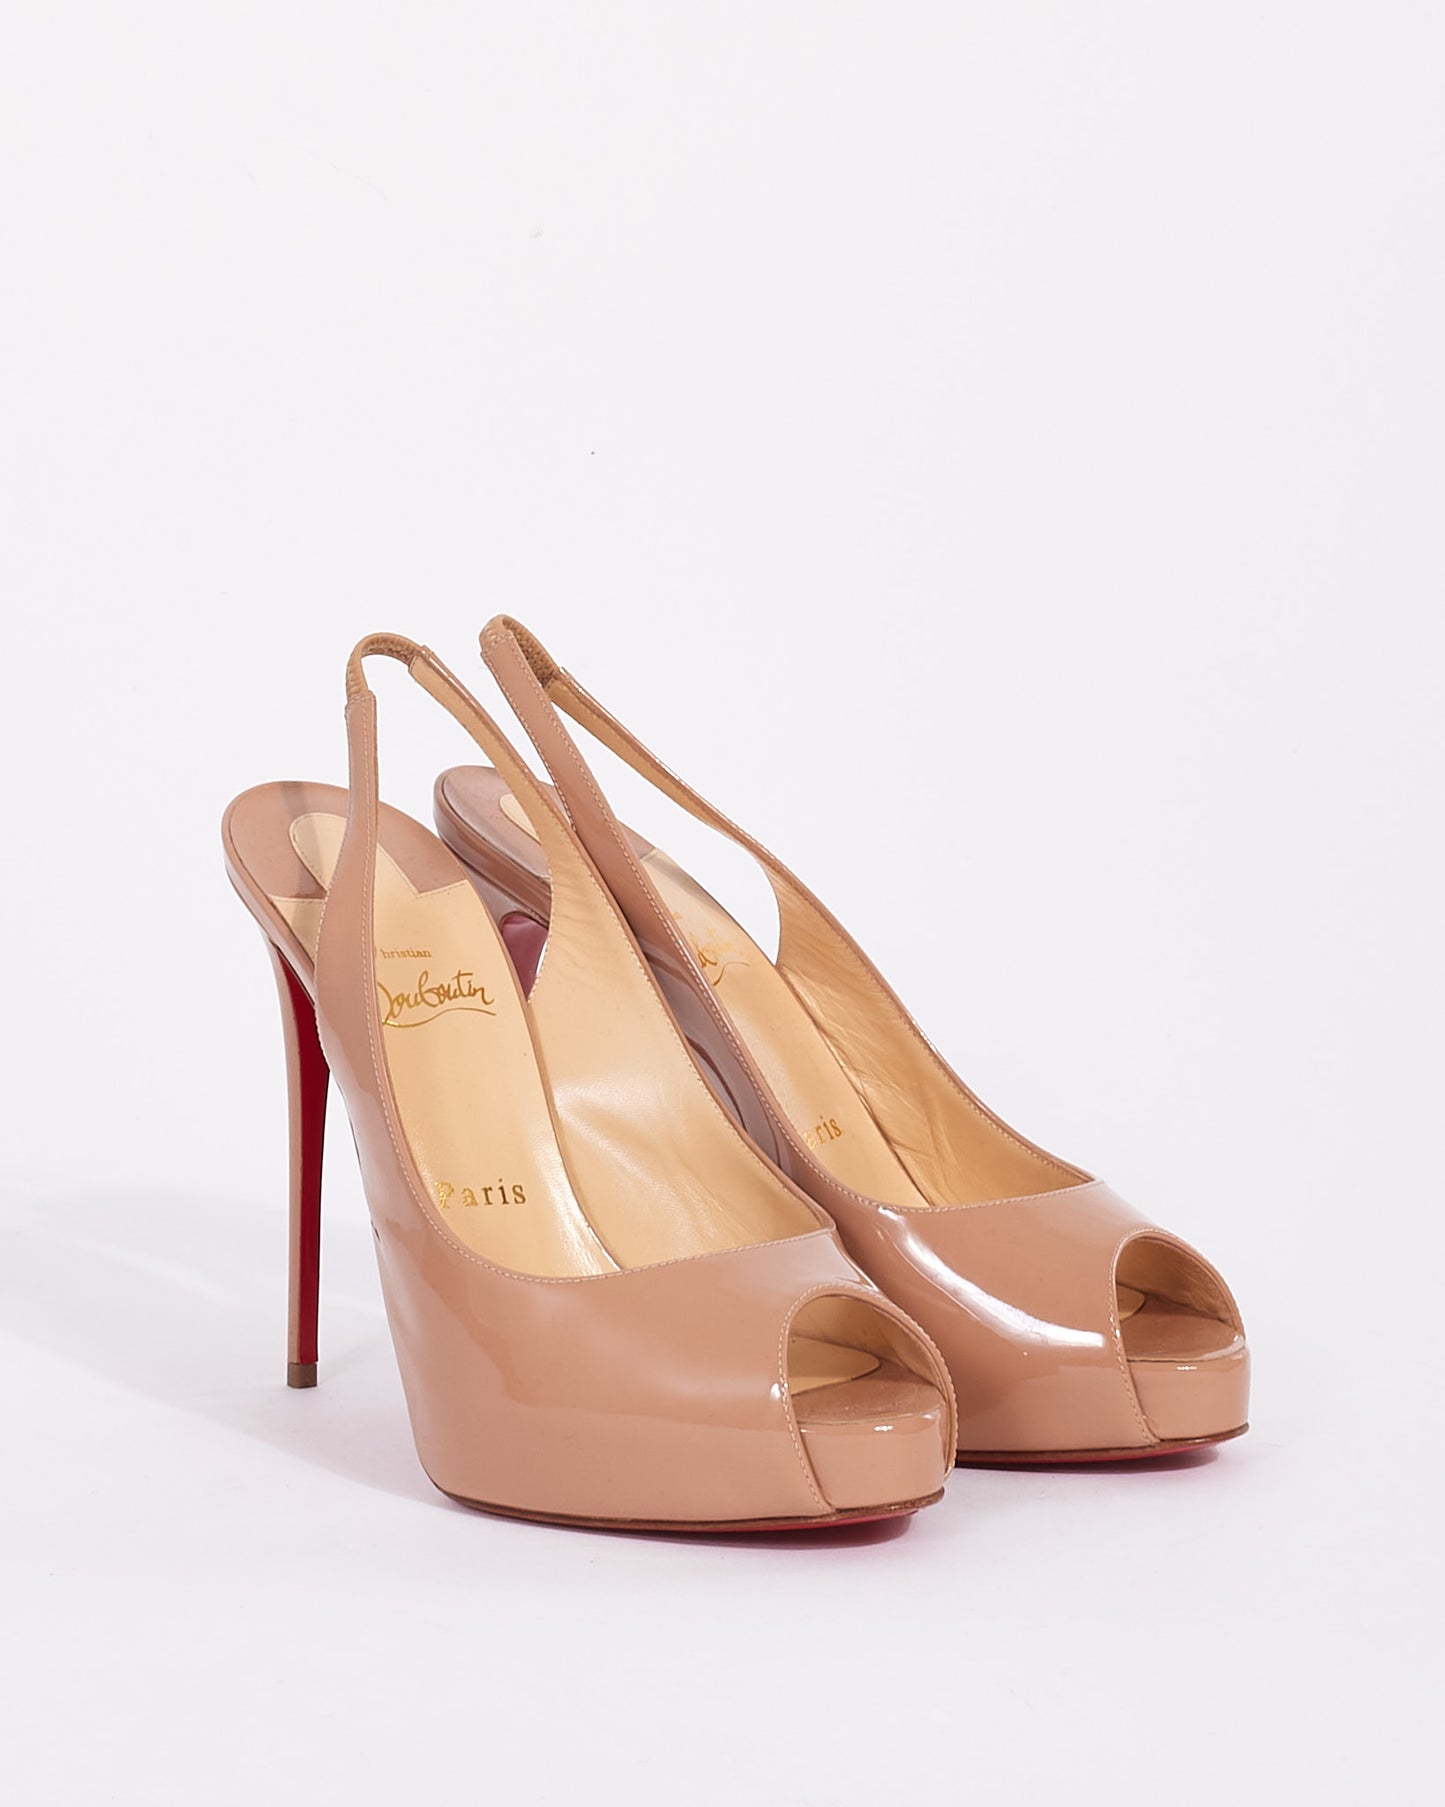 Christian Louboutin Beige Patent Leather Private Number 120 Peep Toe Heels - 38